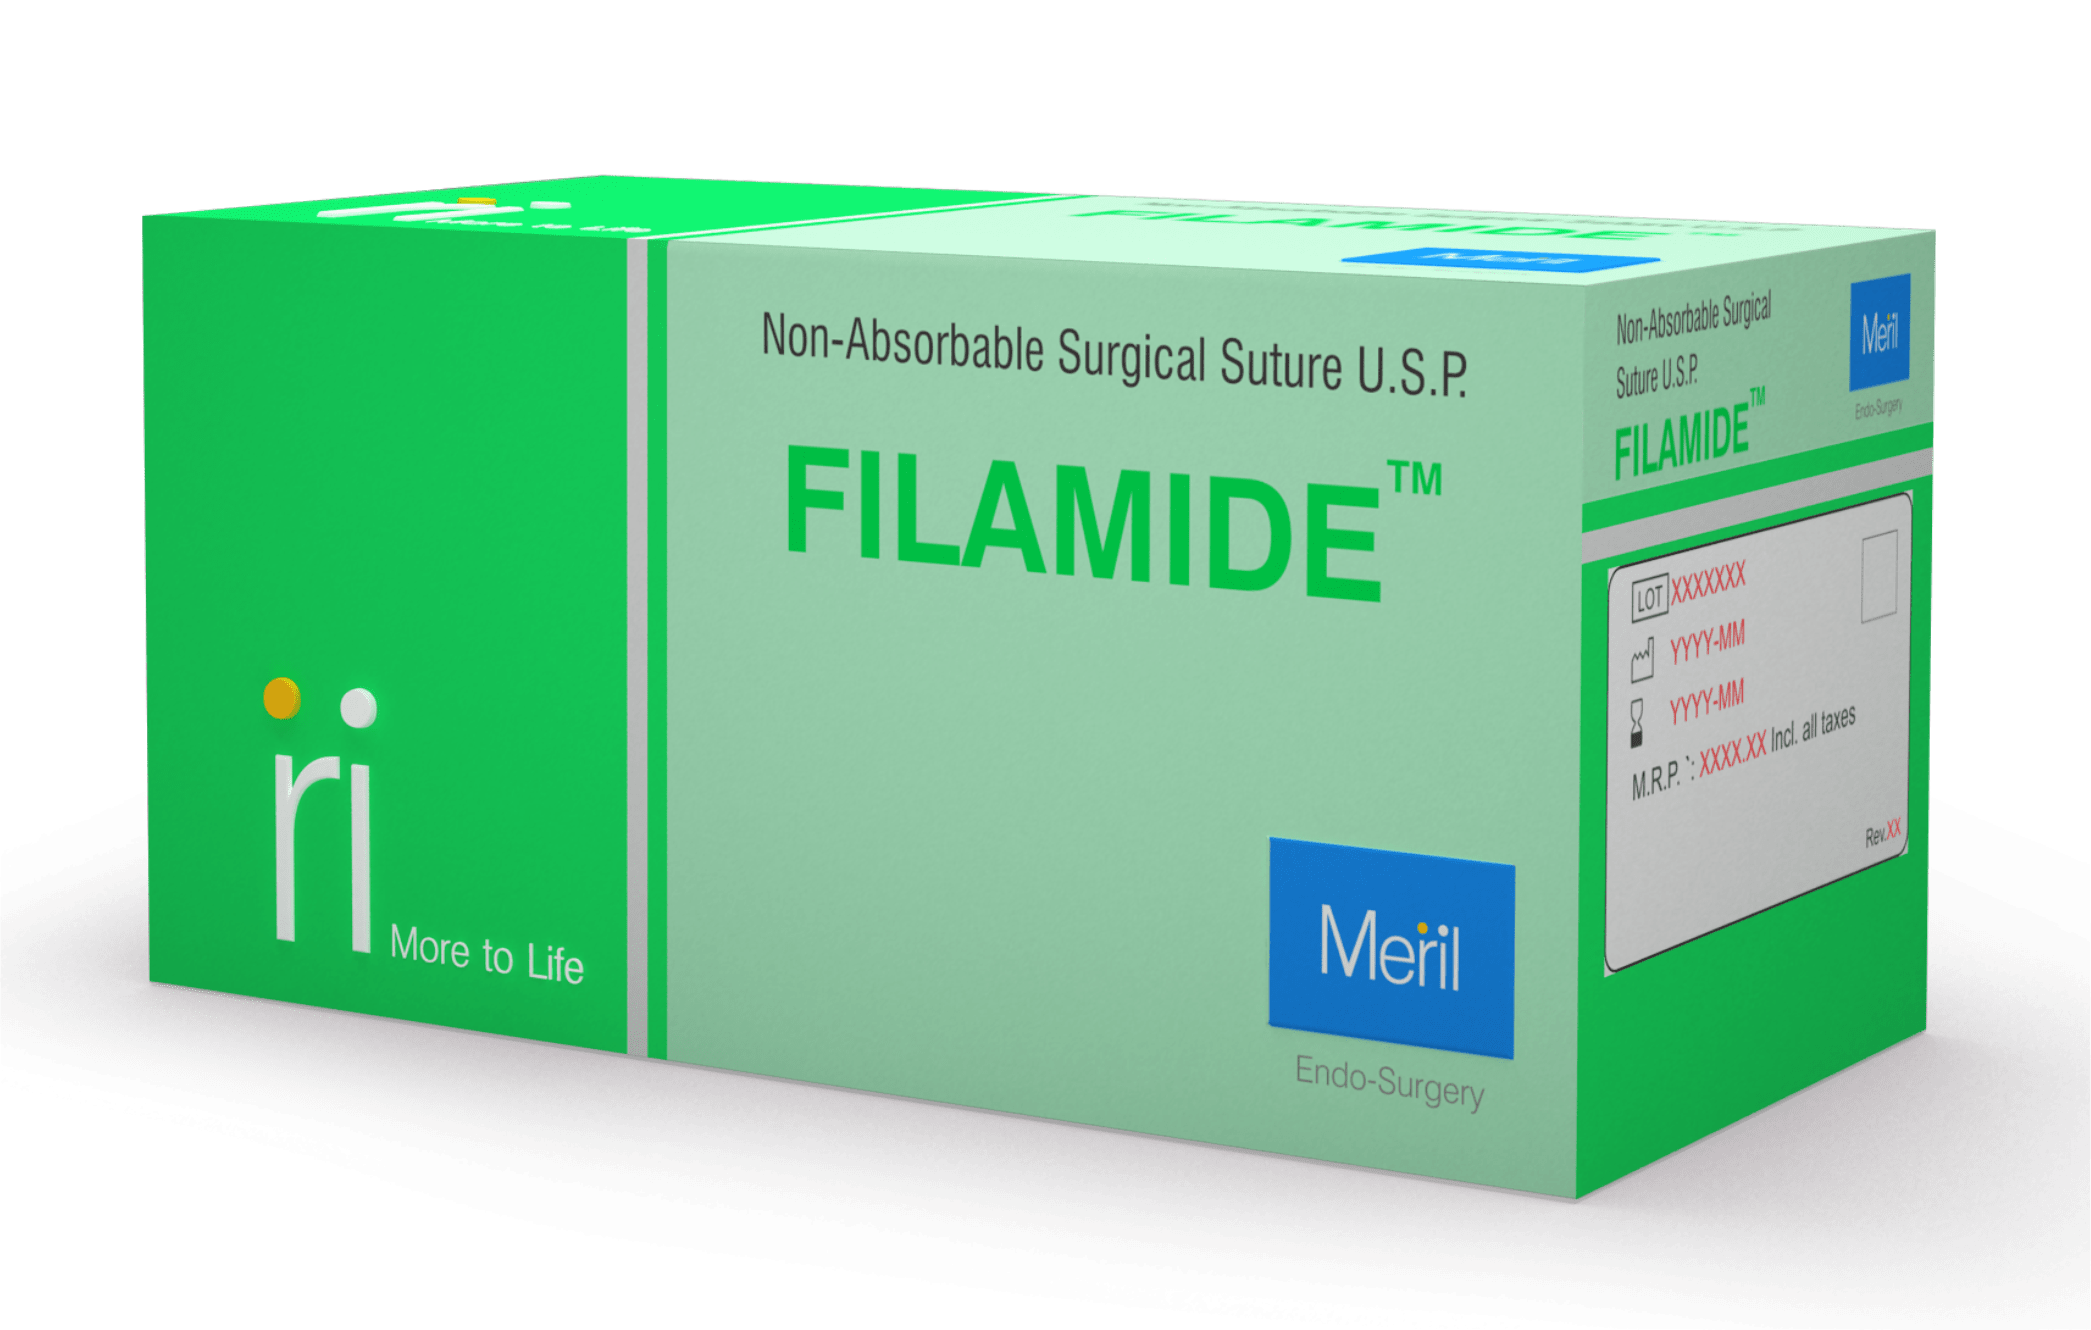 FILAMIDE - Non-Absorbable Plastic Surgical Suture